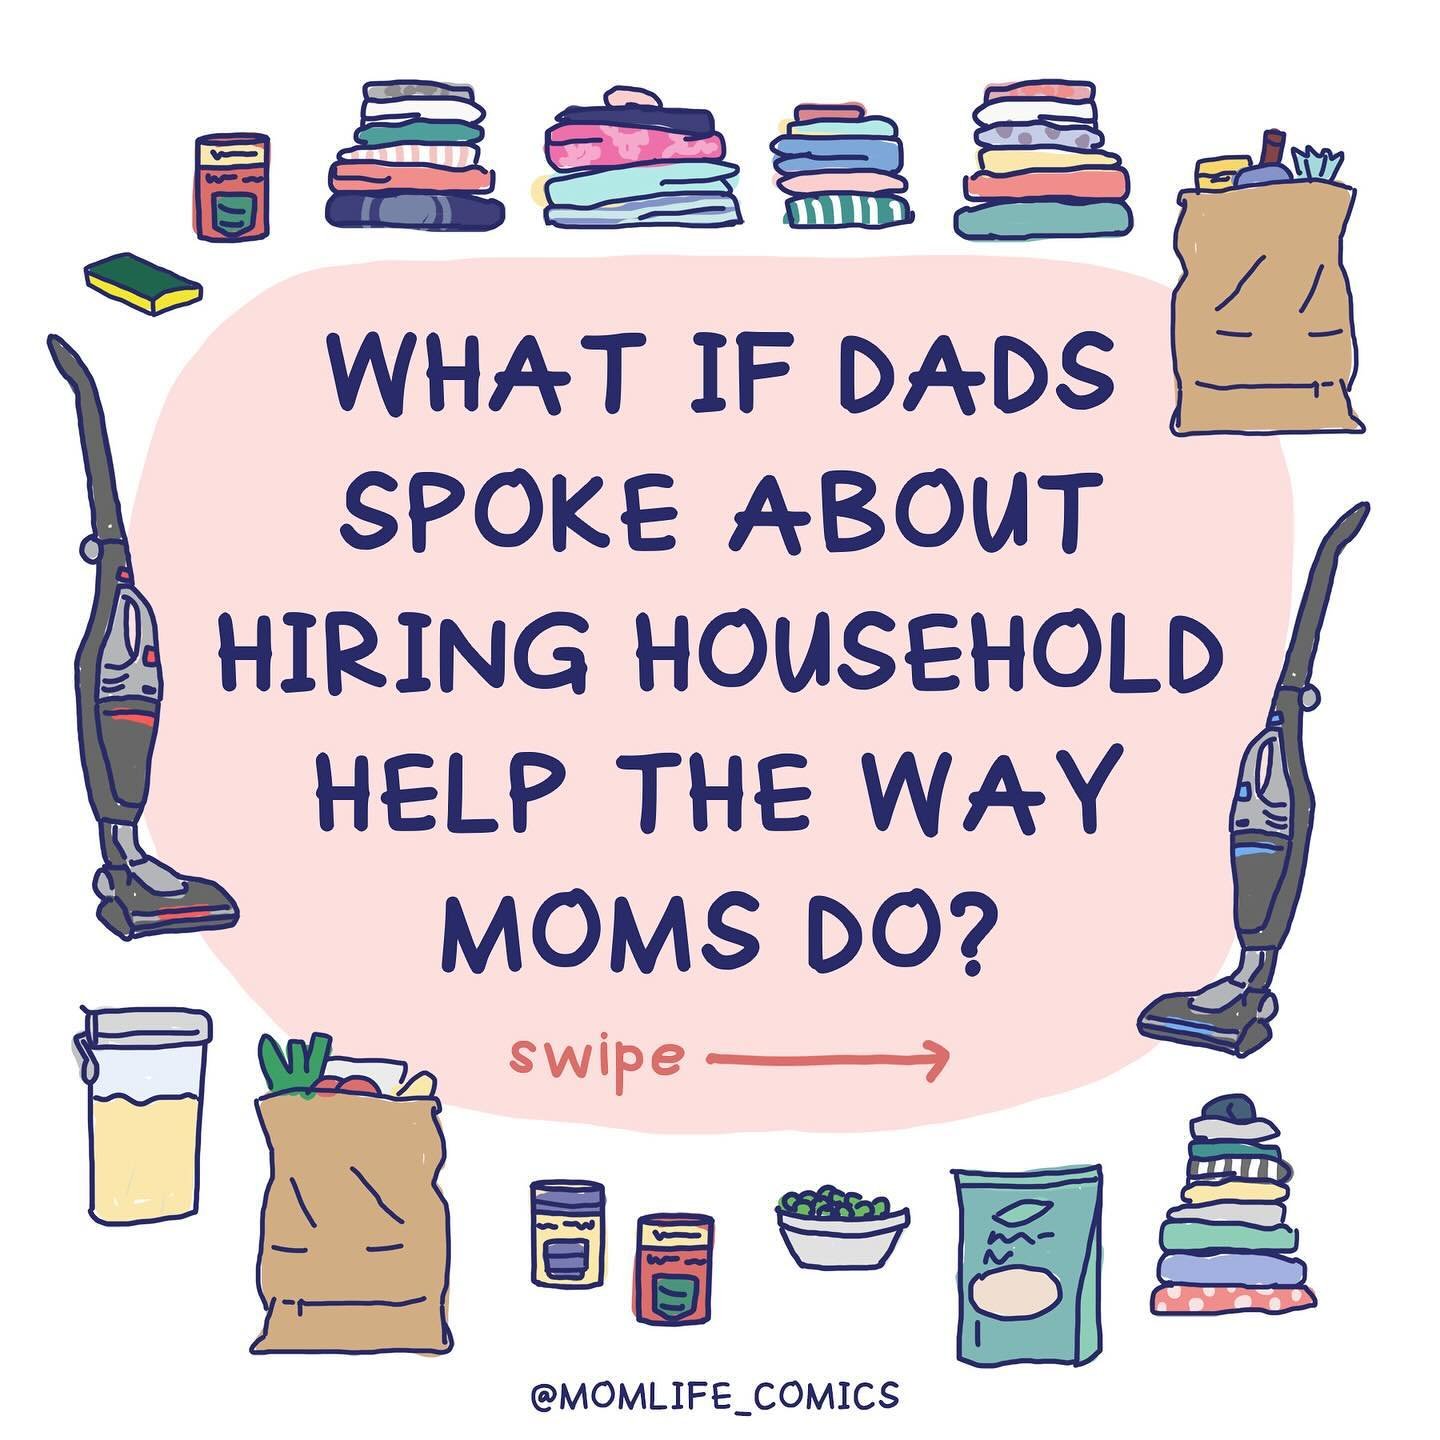 Let&rsquo;s talk about the double standards surrounding hiring household help/outsourcing household tasks:

So many of you message me about the immense sense of guilt AND simultaneous relief you feel whenever you outsource a typically &ldquo;female-c